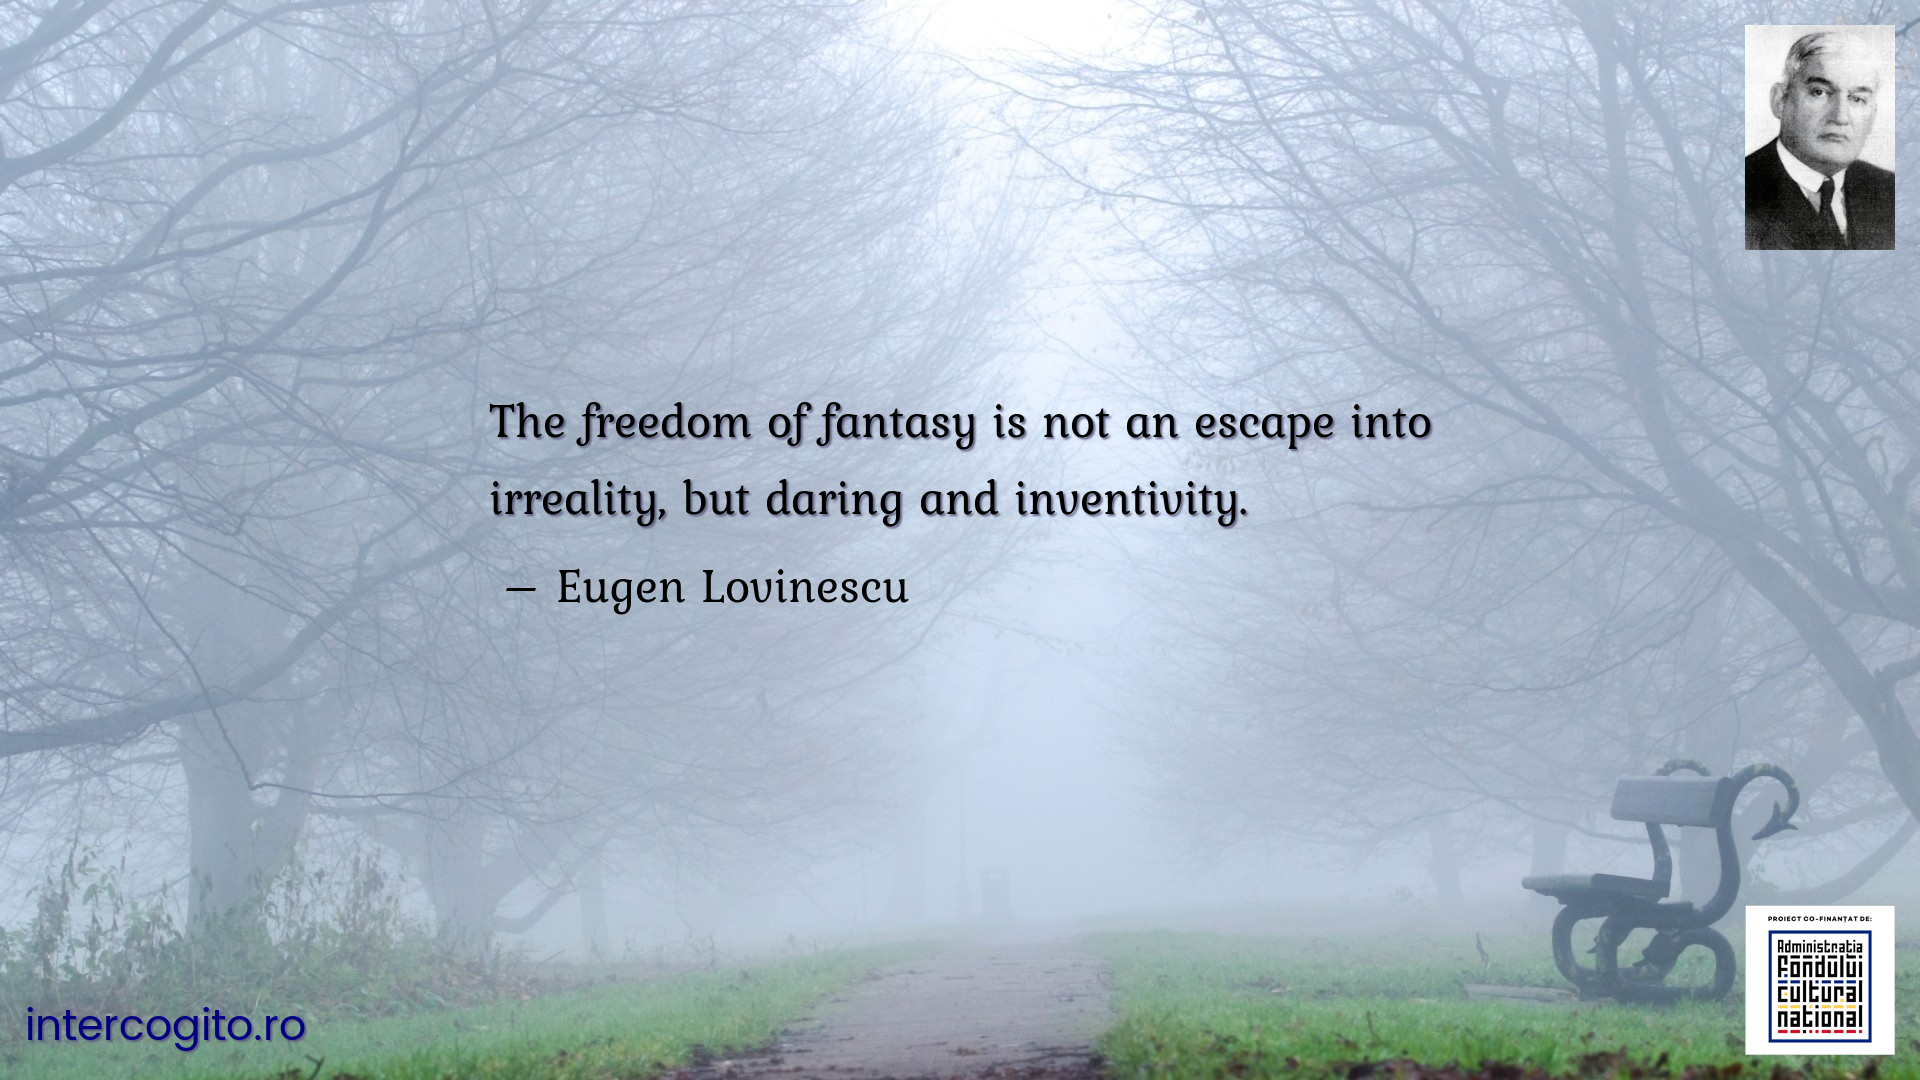 The freedom of fantasy is not an escape into irreality, but daring and inventivity.